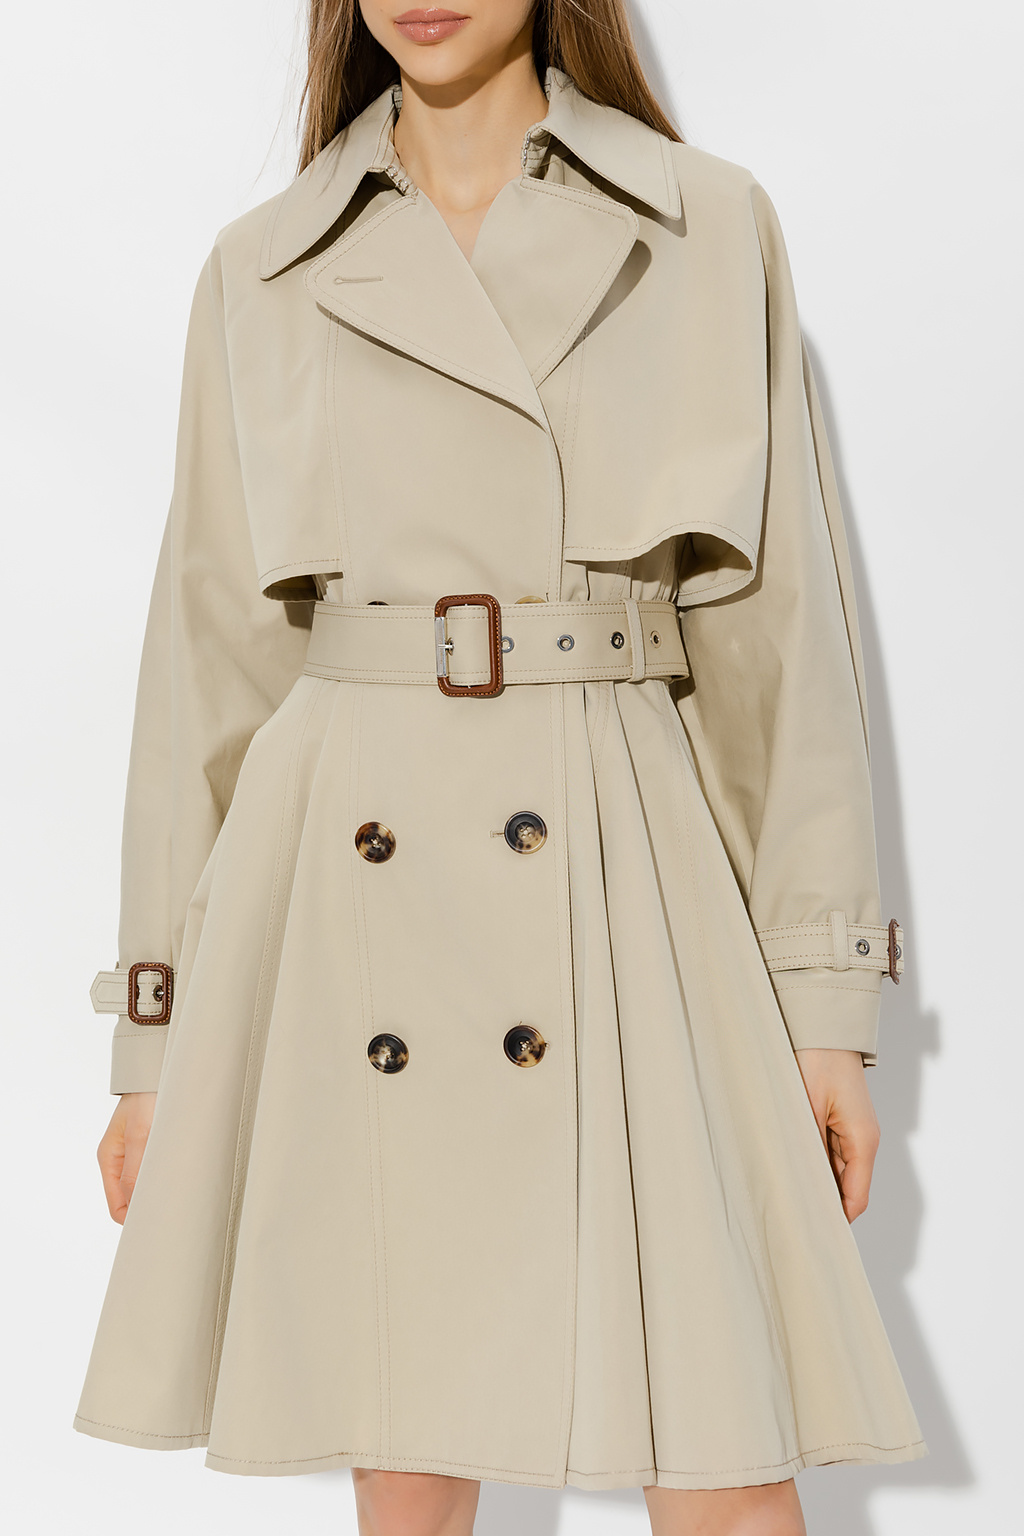 Louis Vuitton Women's Double Breasted Trench Long Coat Cotton with